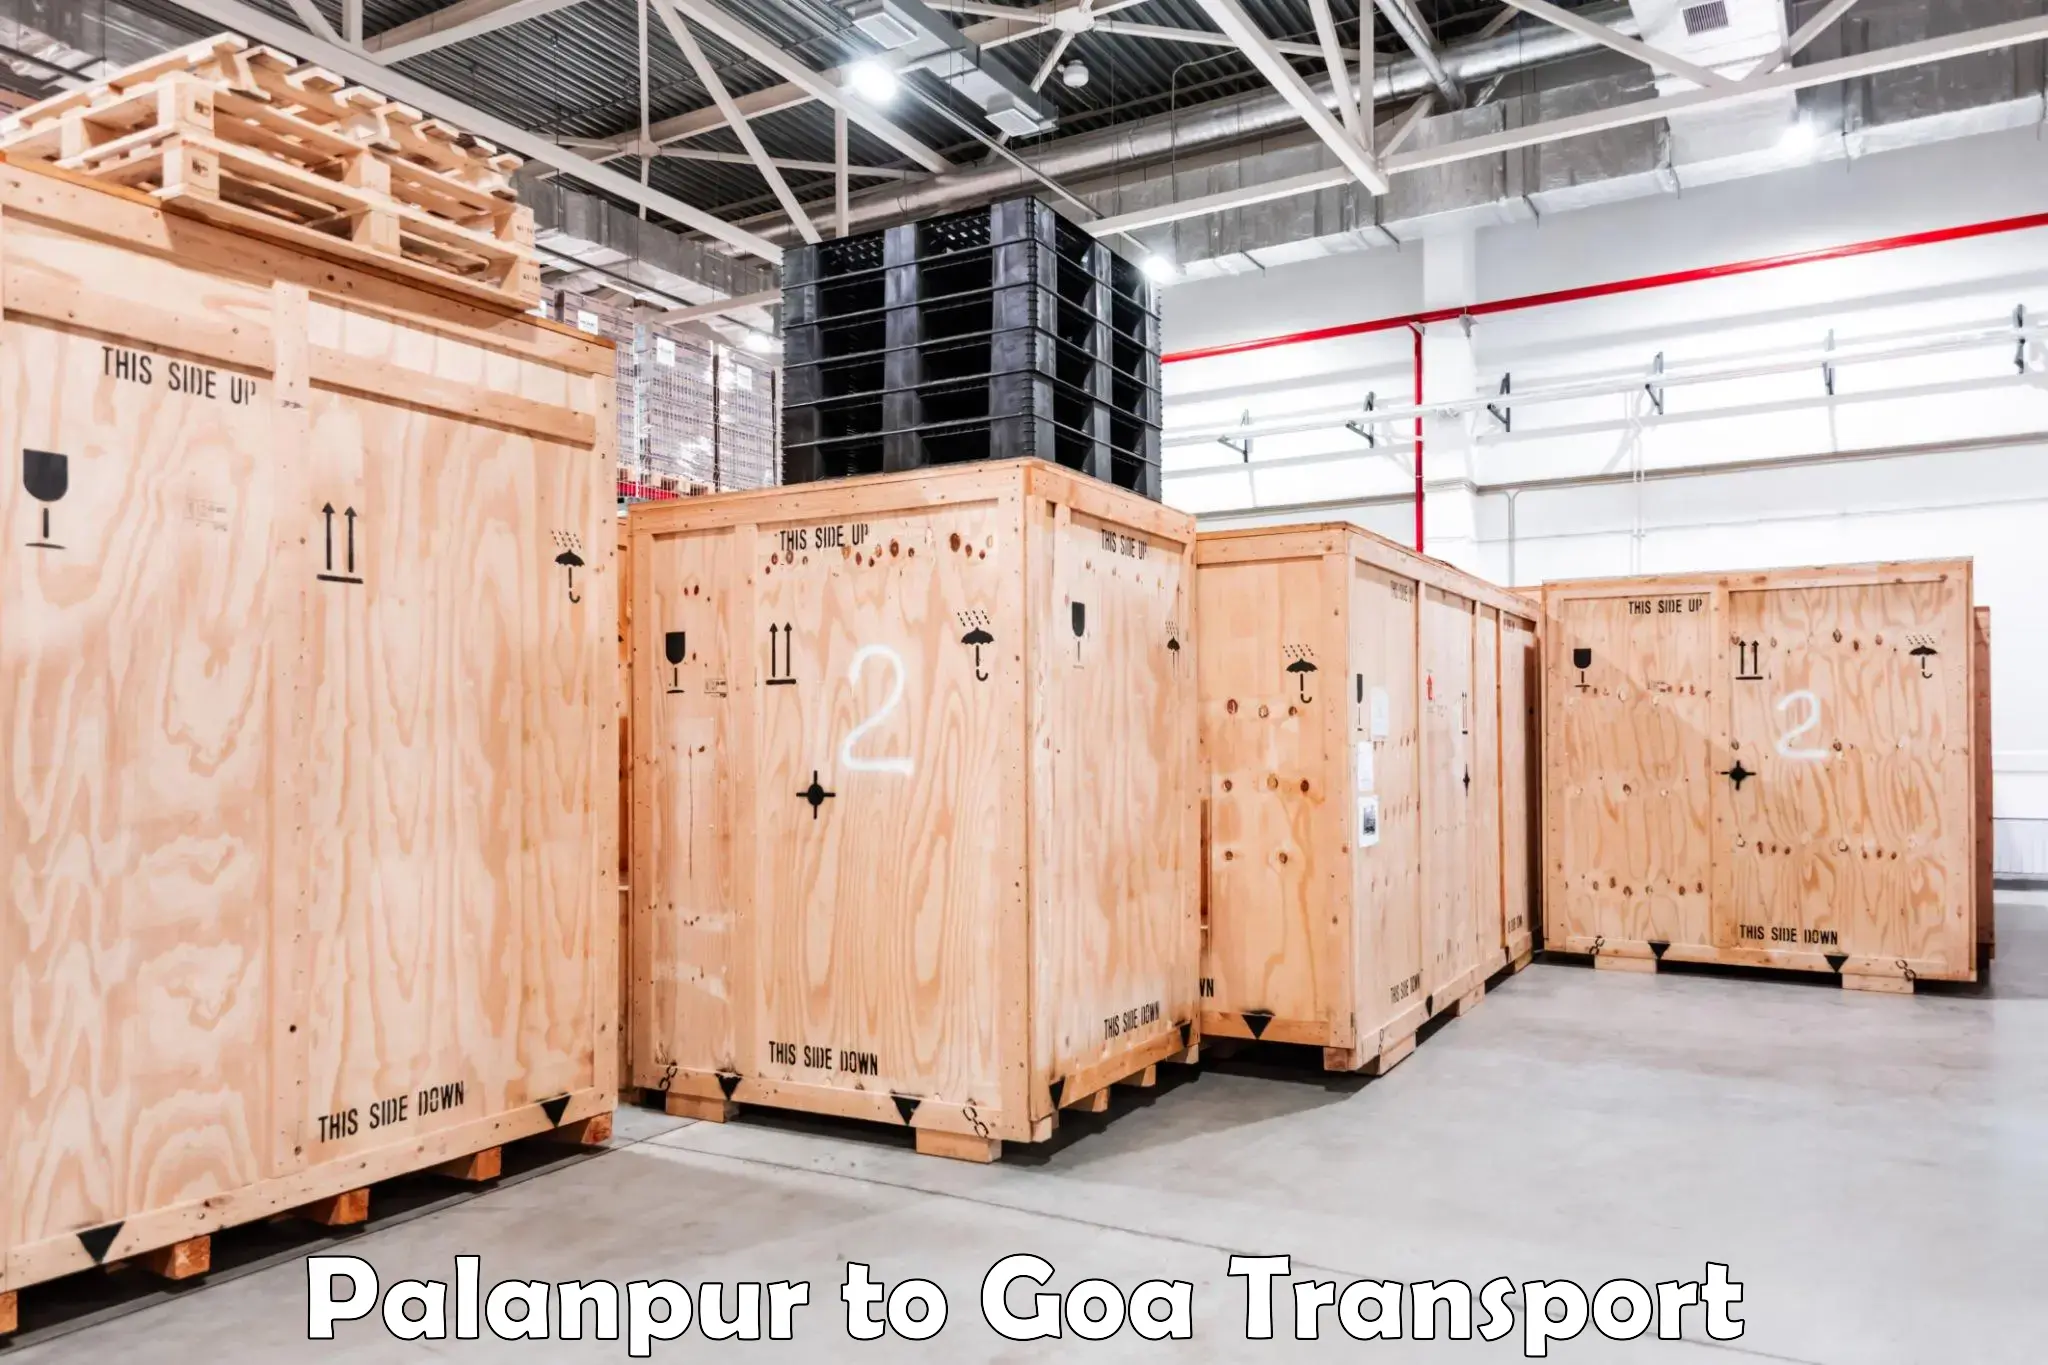 Transport bike from one state to another Palanpur to Goa University